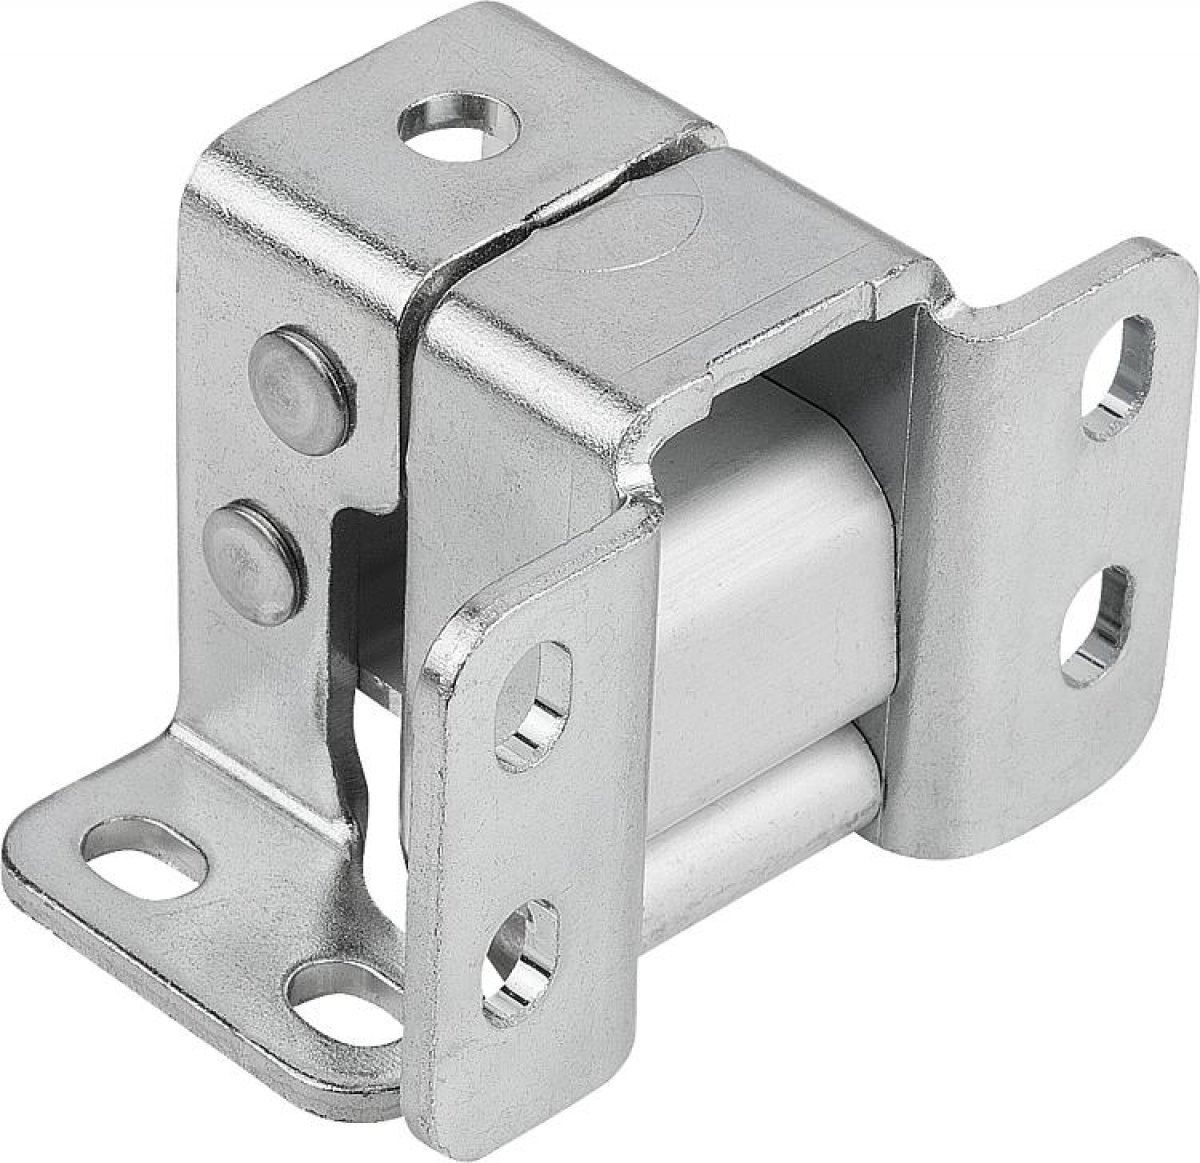 Hinges steel or stainless steel internal, opening angle 125°